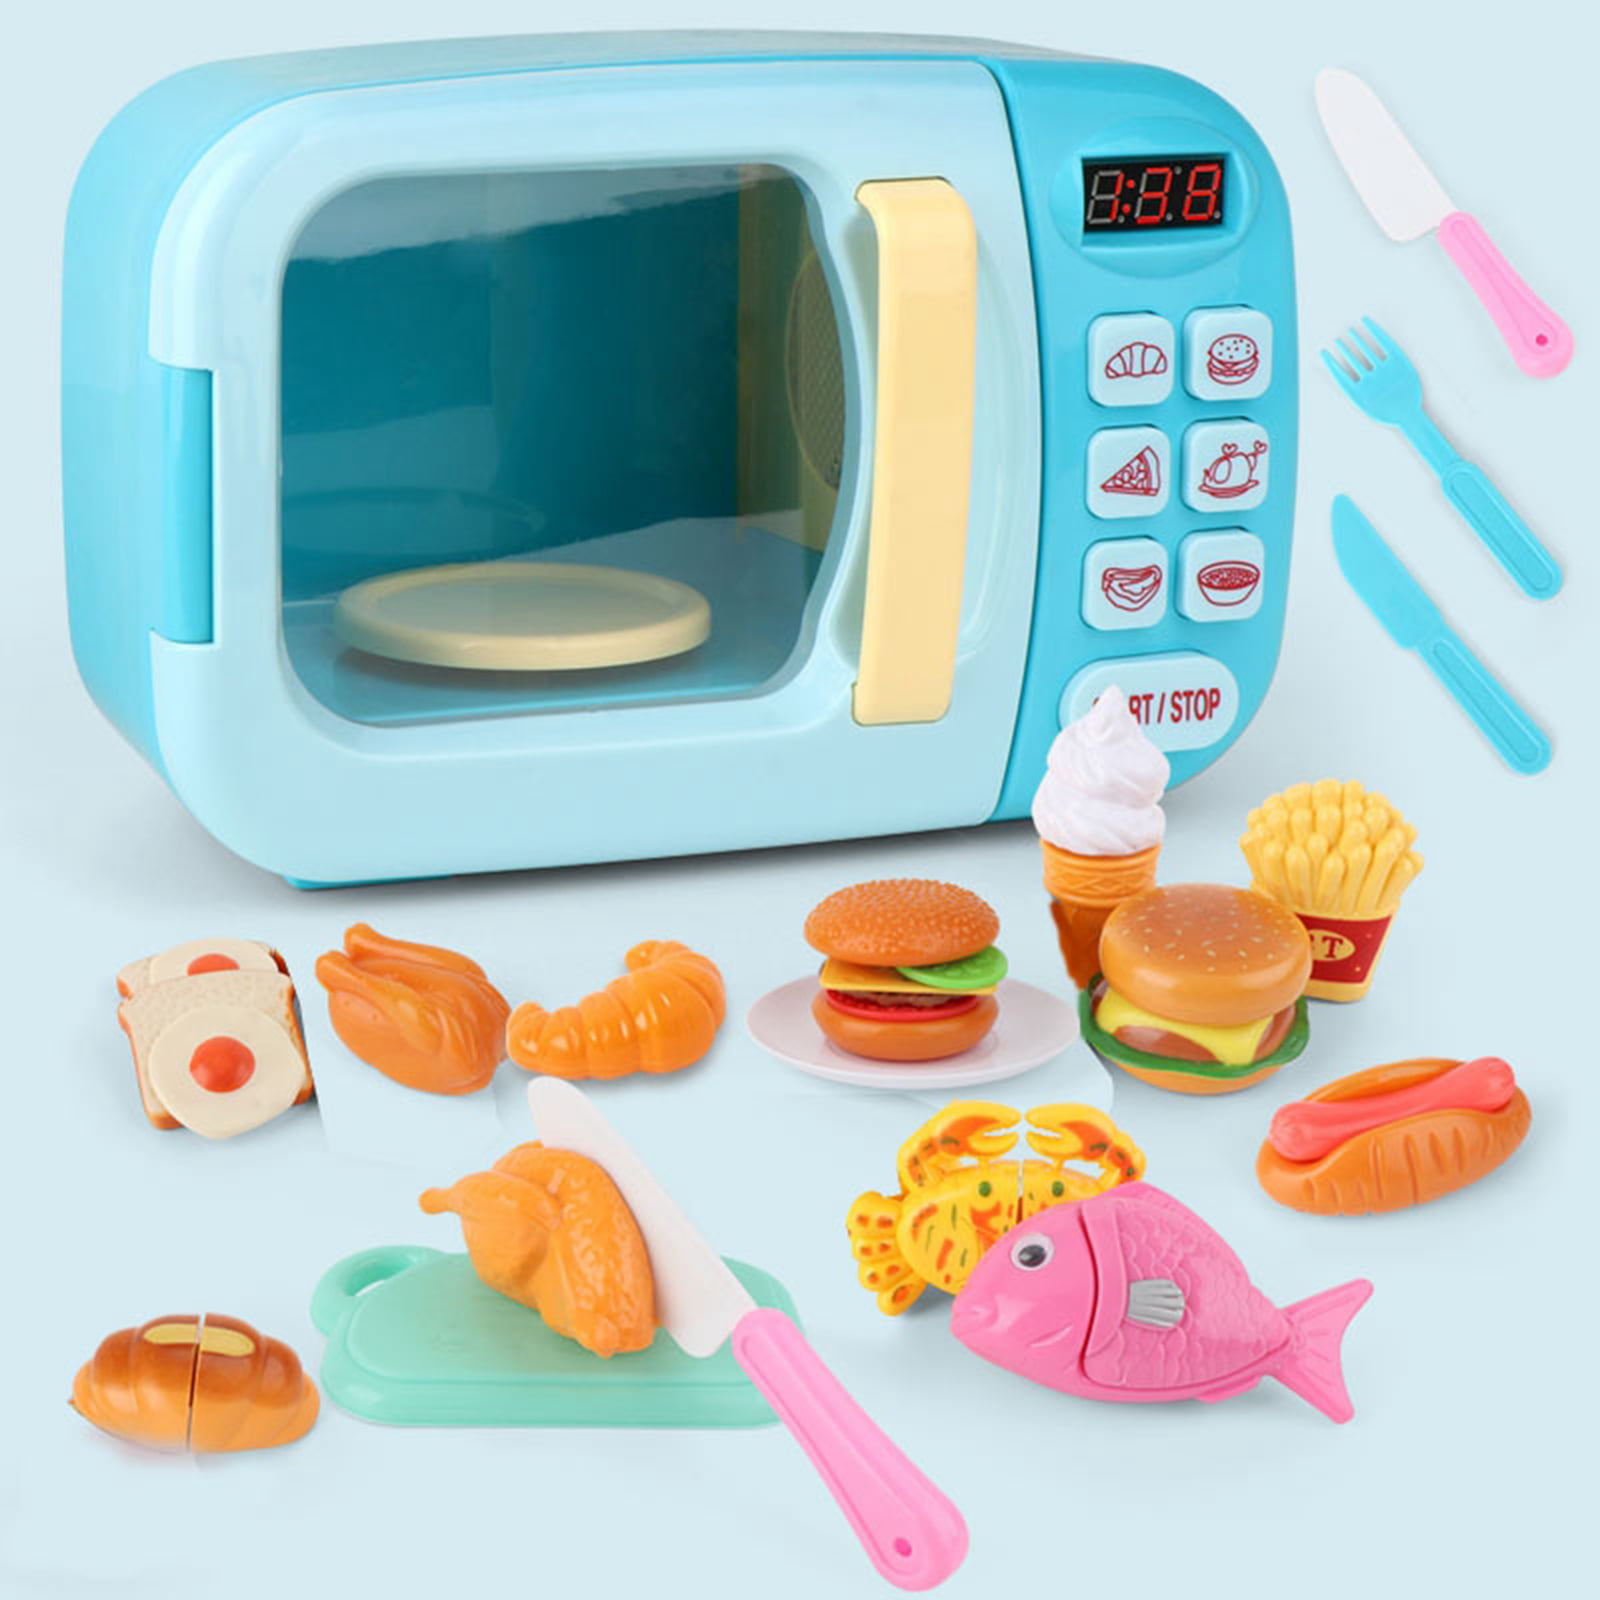 Super Cool Kids Microwave Machine Kids Role Play Pretend Microwave Realist Toy 